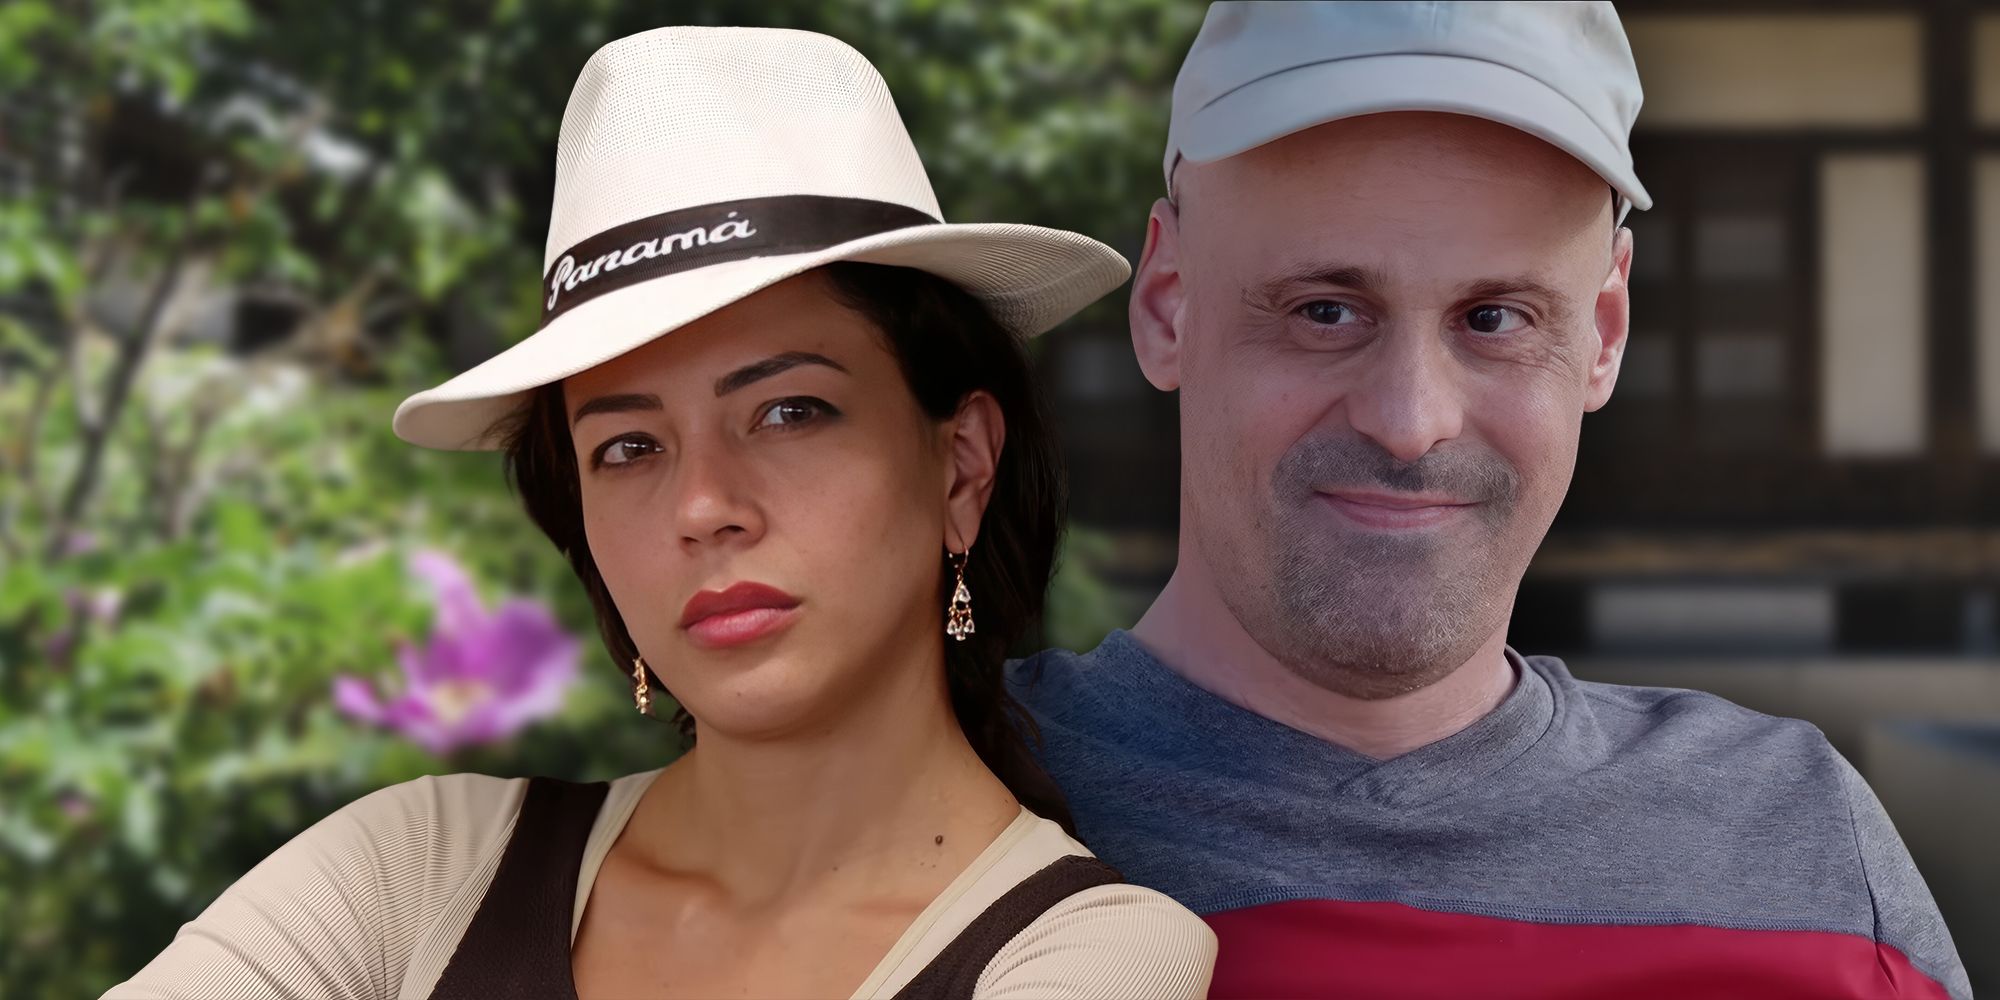 Jasmine and Gino from 90 Day Fiancé: Before The 90 Days montage her serious him smiling